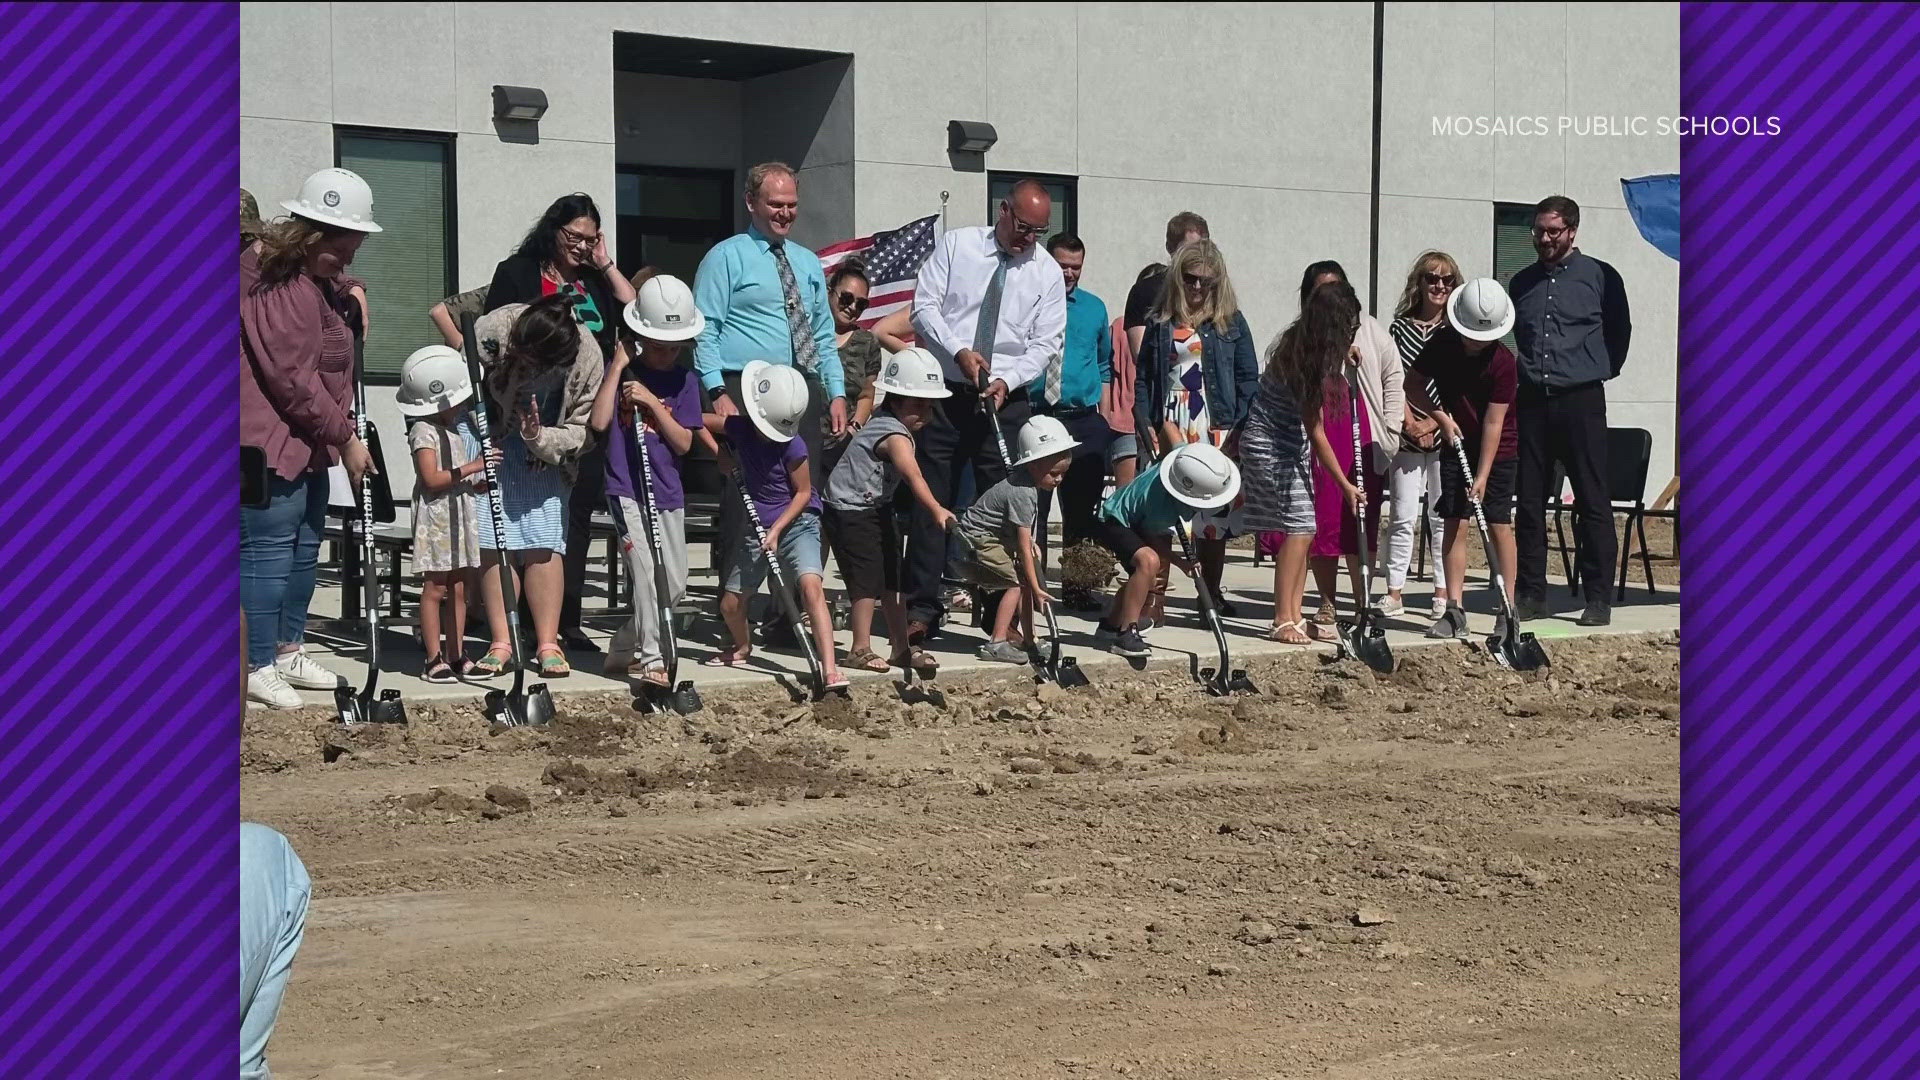 The MOSAICS Public School hosted a groundbreaking ceremony Thursday for its new band room, which is expected to be finished around November.